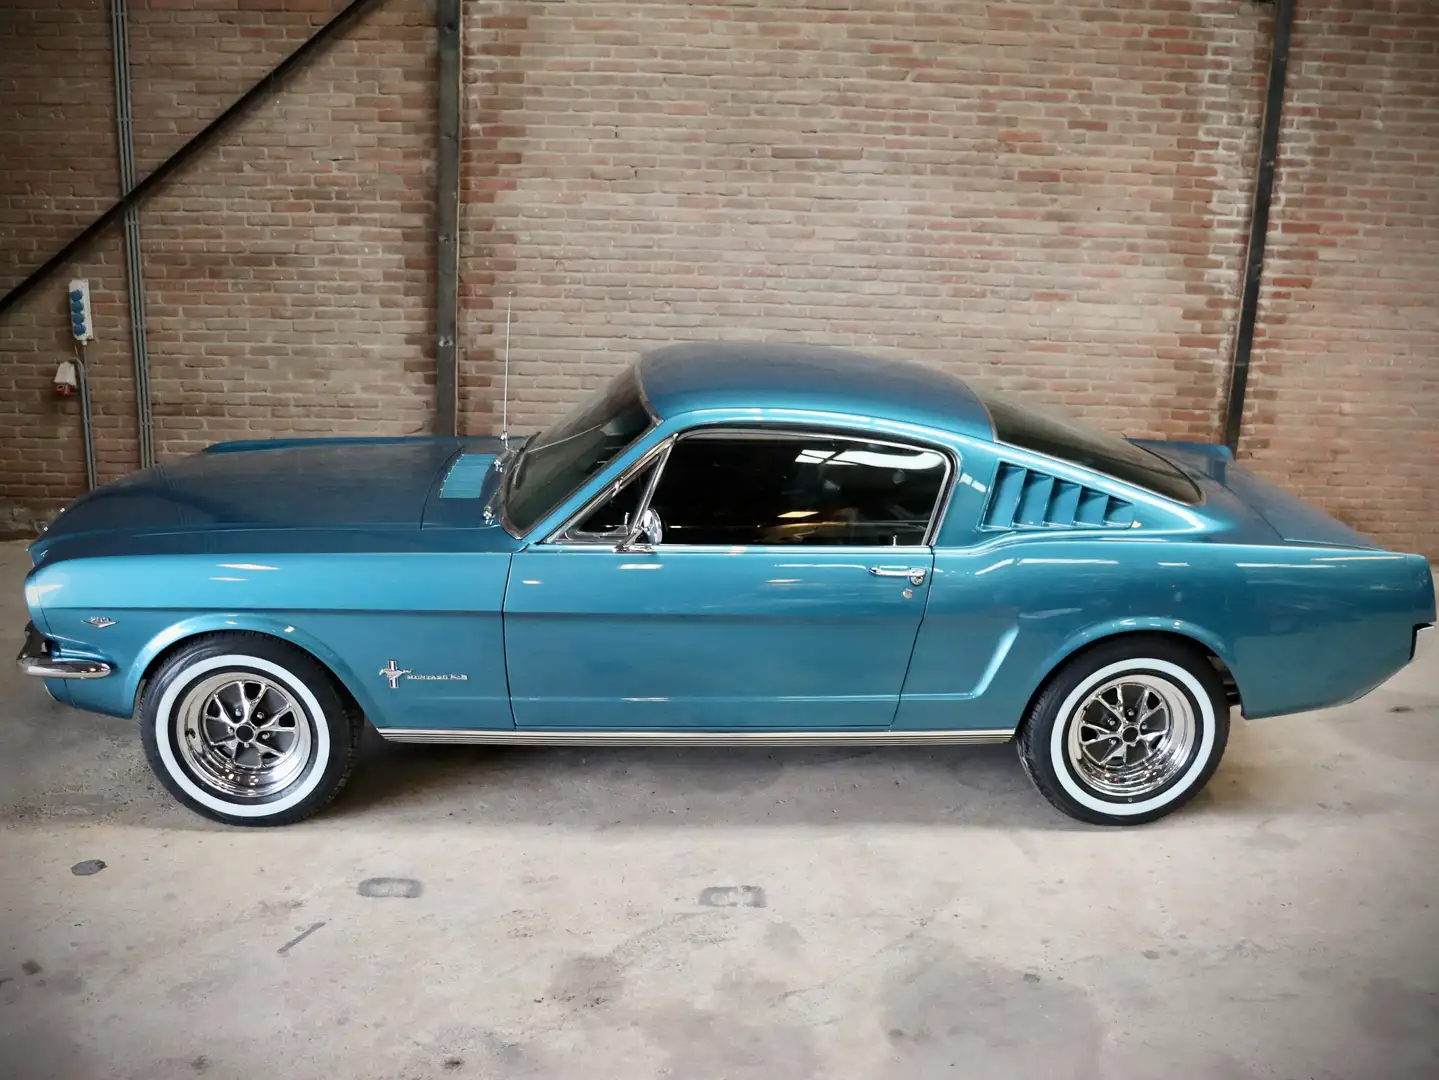 Ford Mustang Fastback C-code restored to new! price reduction! Azul - 2